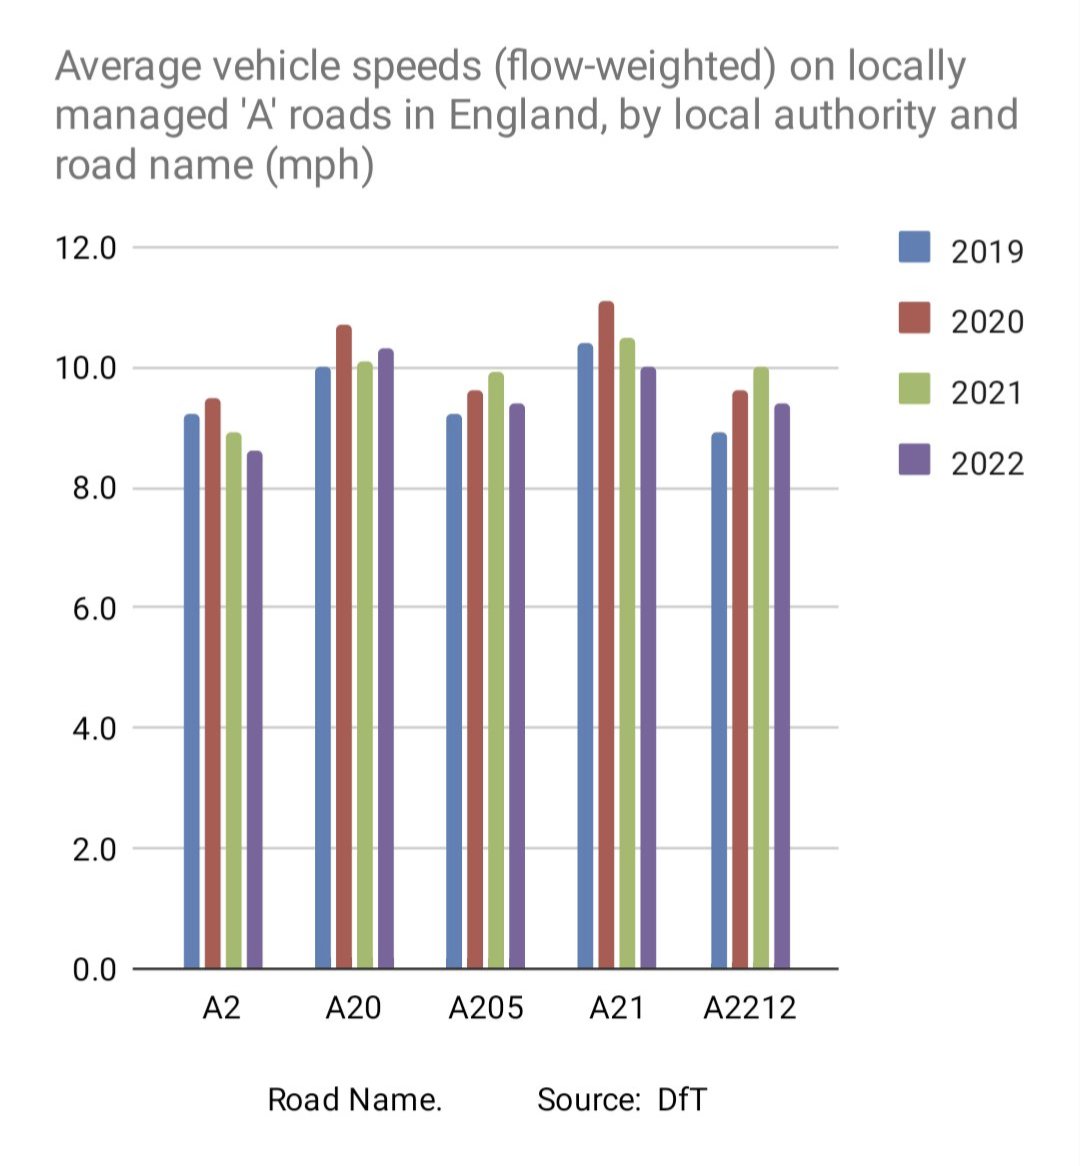 @bbclaurak @bbcpaddy We've prominent anti-LTNers in Lewisham repeatedly claiming (without evidence) that the LTN 'made the A205 South Circular worse' Verifiable DfT & air quality data shows traffic is now 9.7% *less* post-LTN (2019), NOx pollution at its *lowest* ever level, & speeds slightly higher.